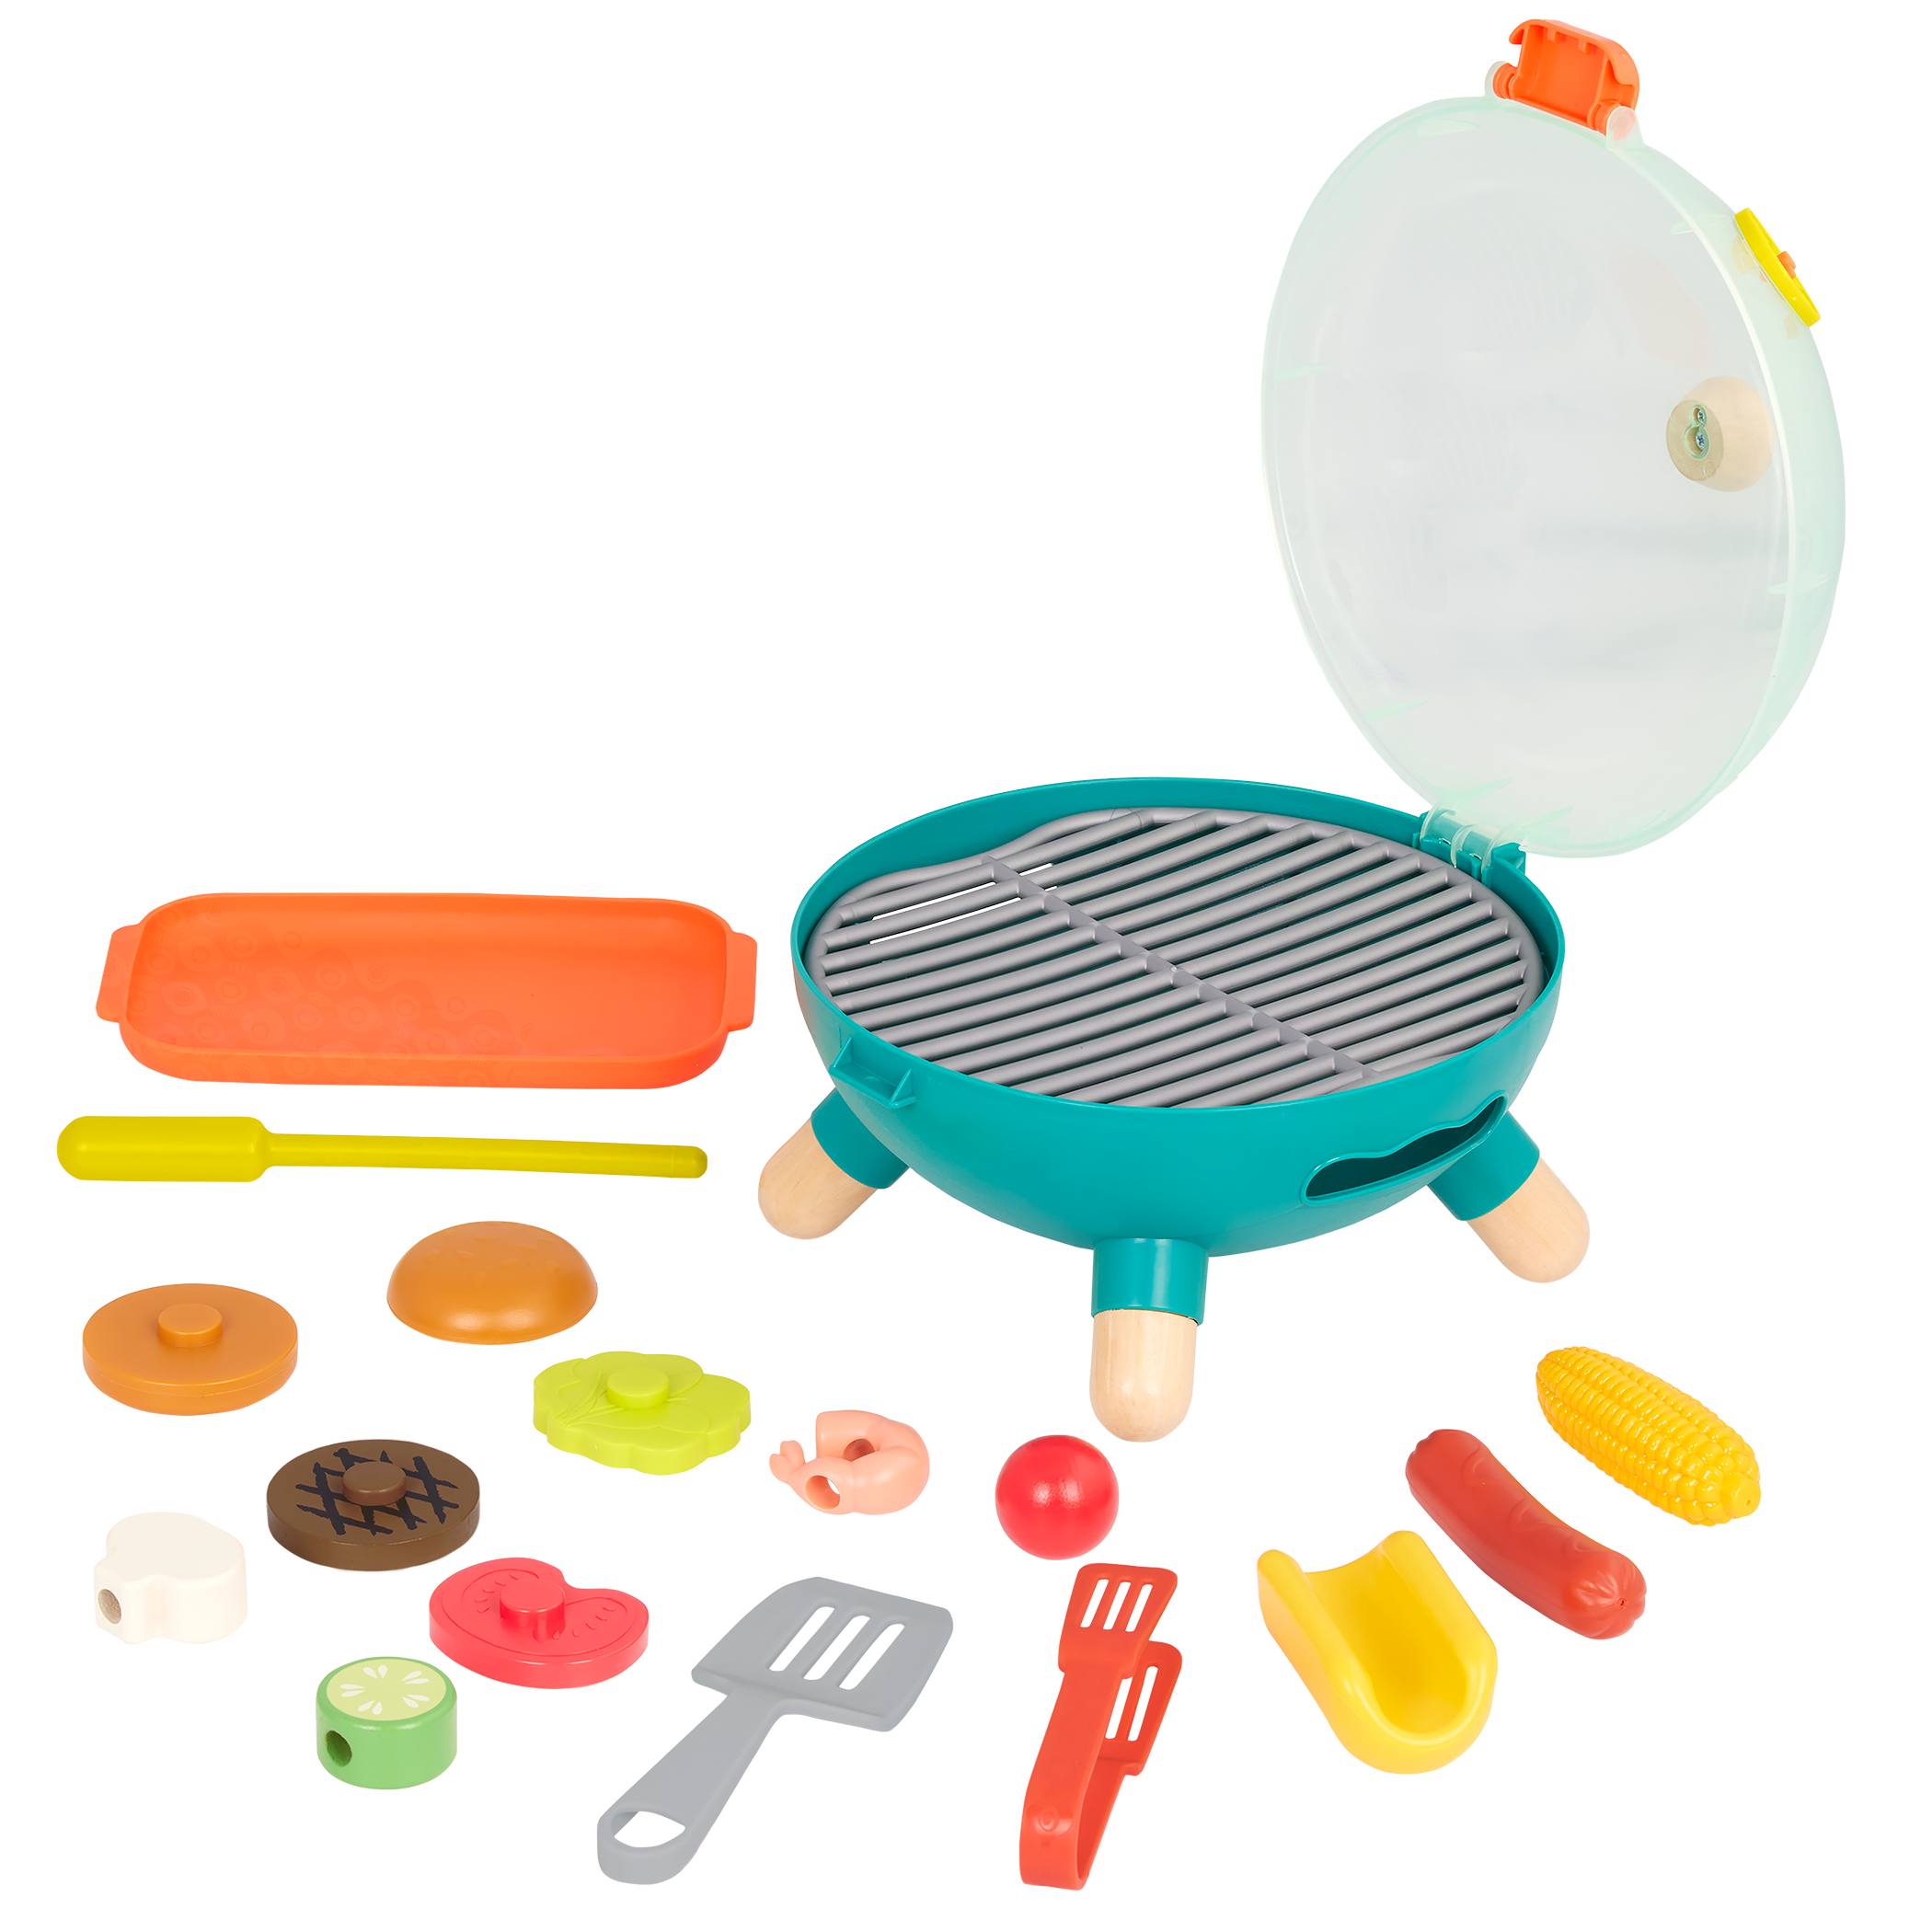 Mini Chef - BBQ Grill Playset, Toy Grill & Play Food